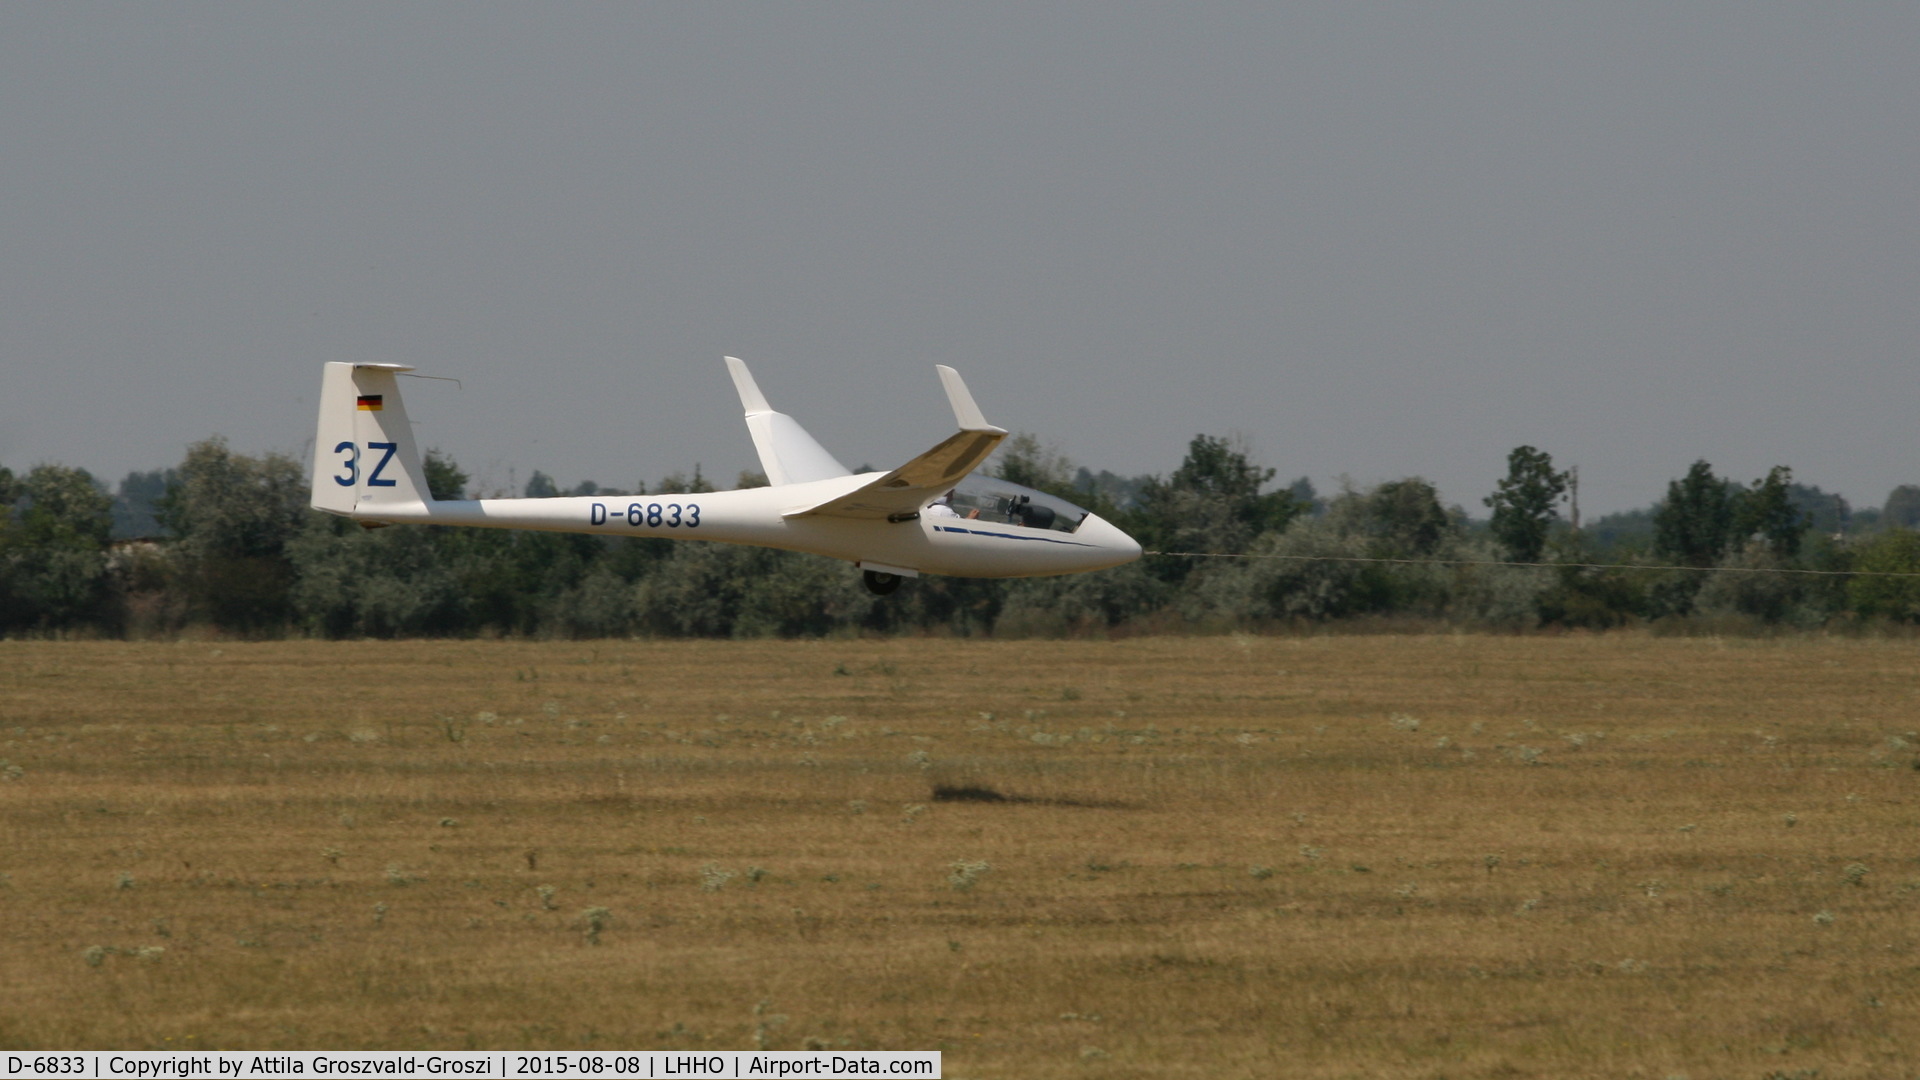 D-6833, 1979 Rolladen-Schneider LS-3a C/N 3338, Hajdúszoboszló Airport, Hungary - 60. Hungary Gliding National Championship and third Civis Thermal Cup, 2015